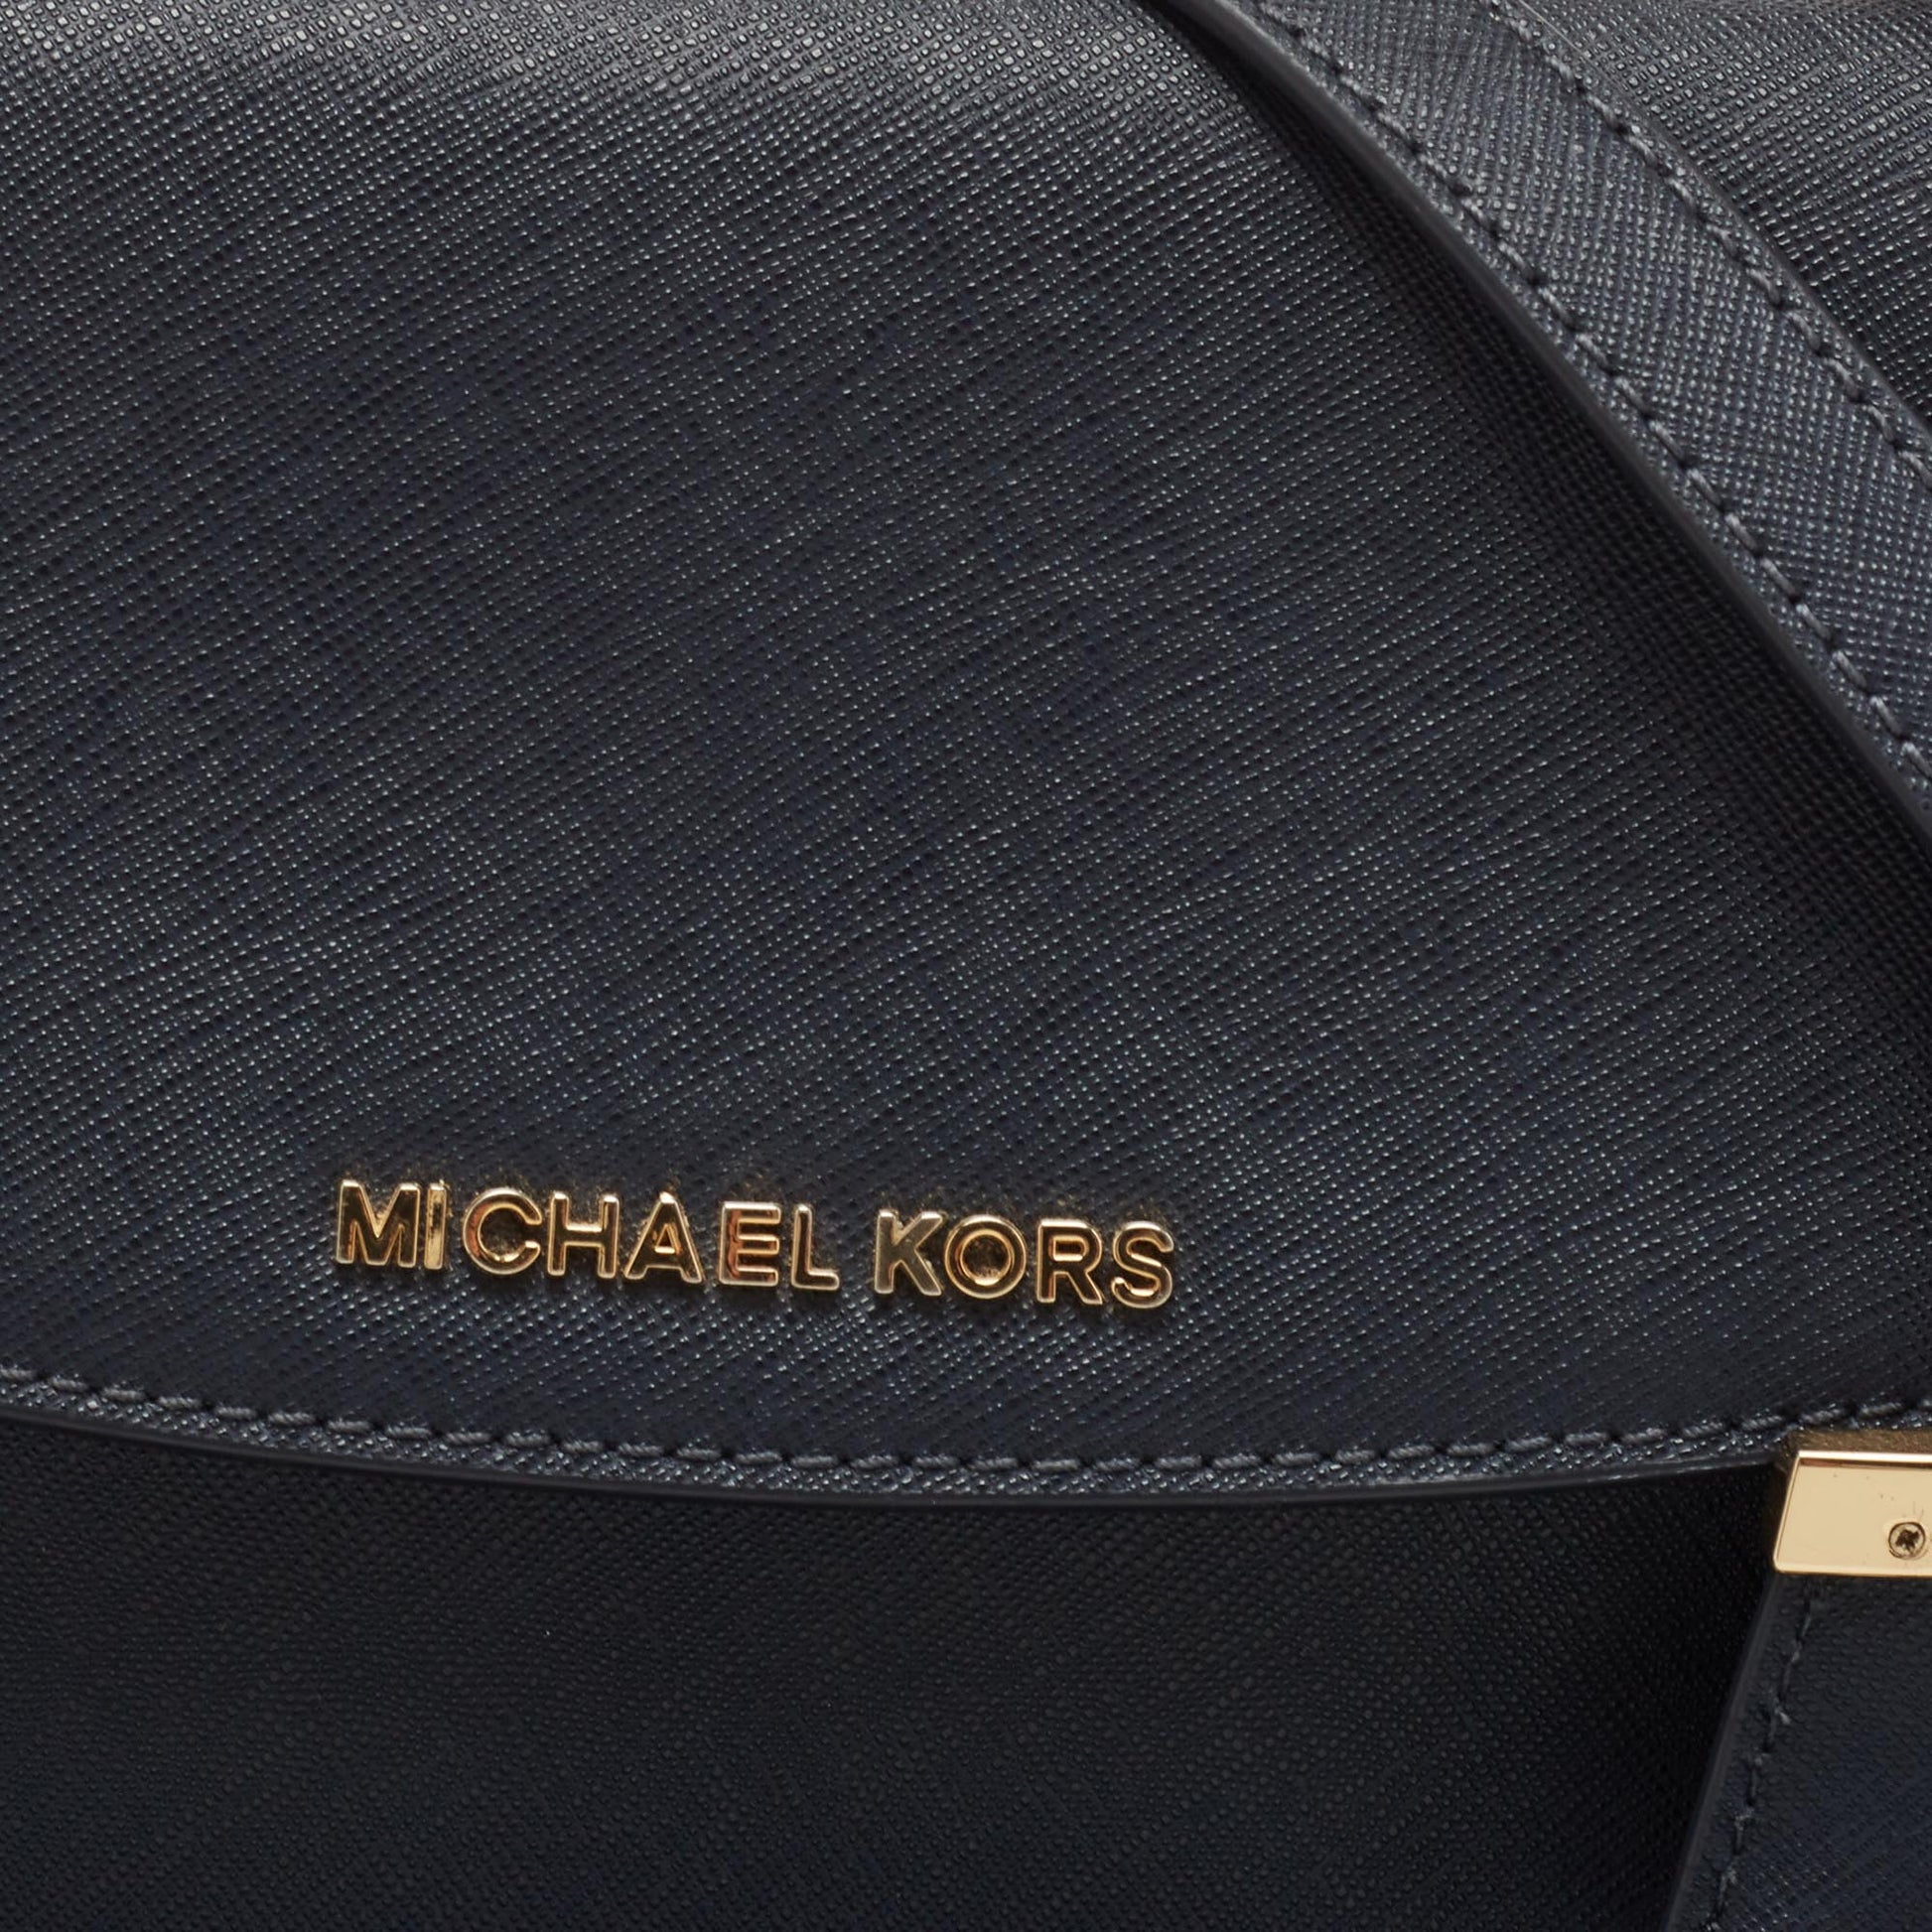 Michael Kors Navy Blue Saffiano Leather Small Ava Top Handle Bag - ShopStyle